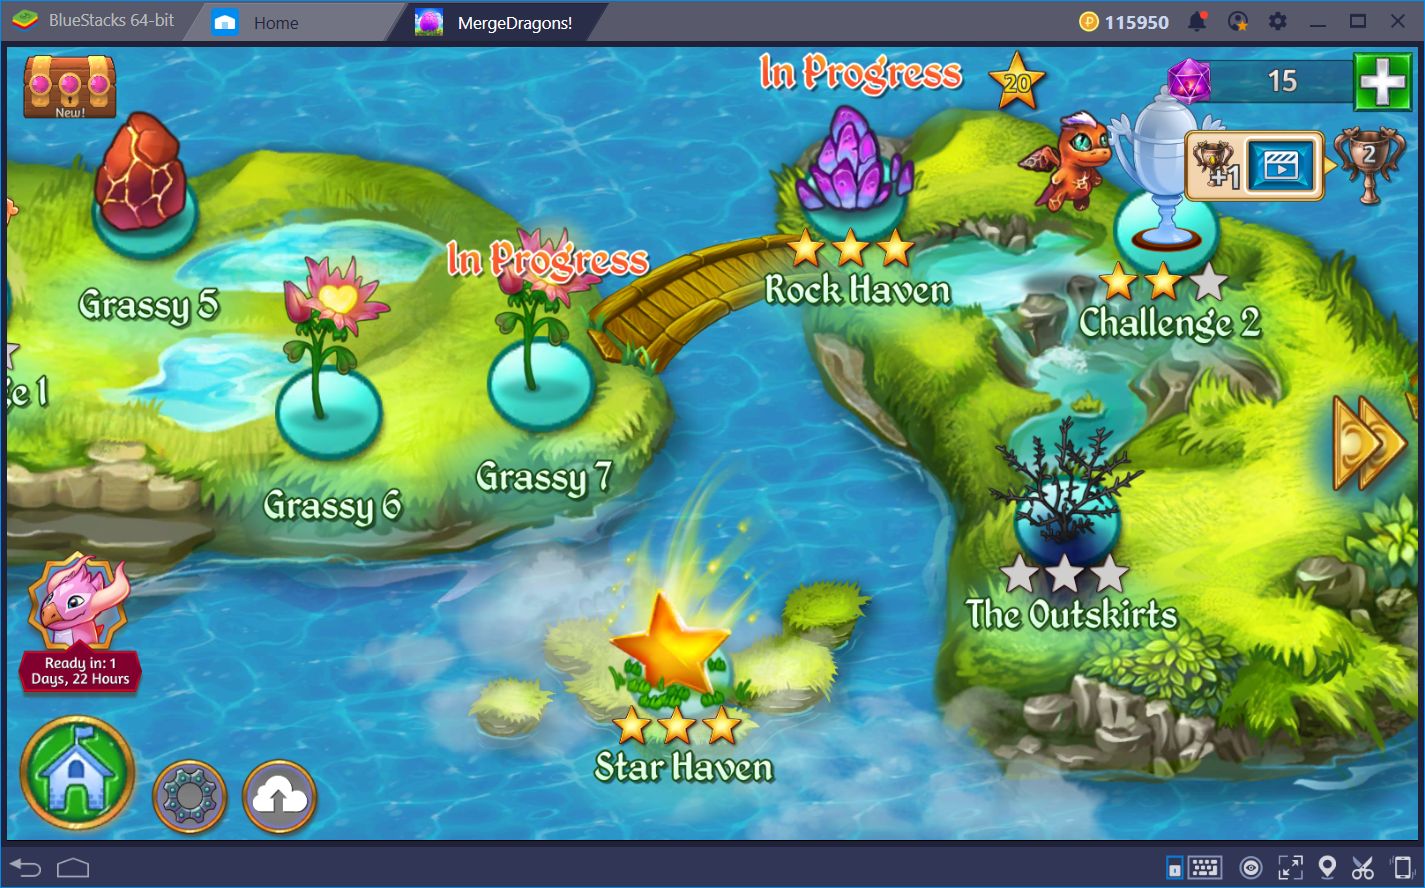 Merge Dragons! on BlueStacks—Improve your Gameplay with our Platform